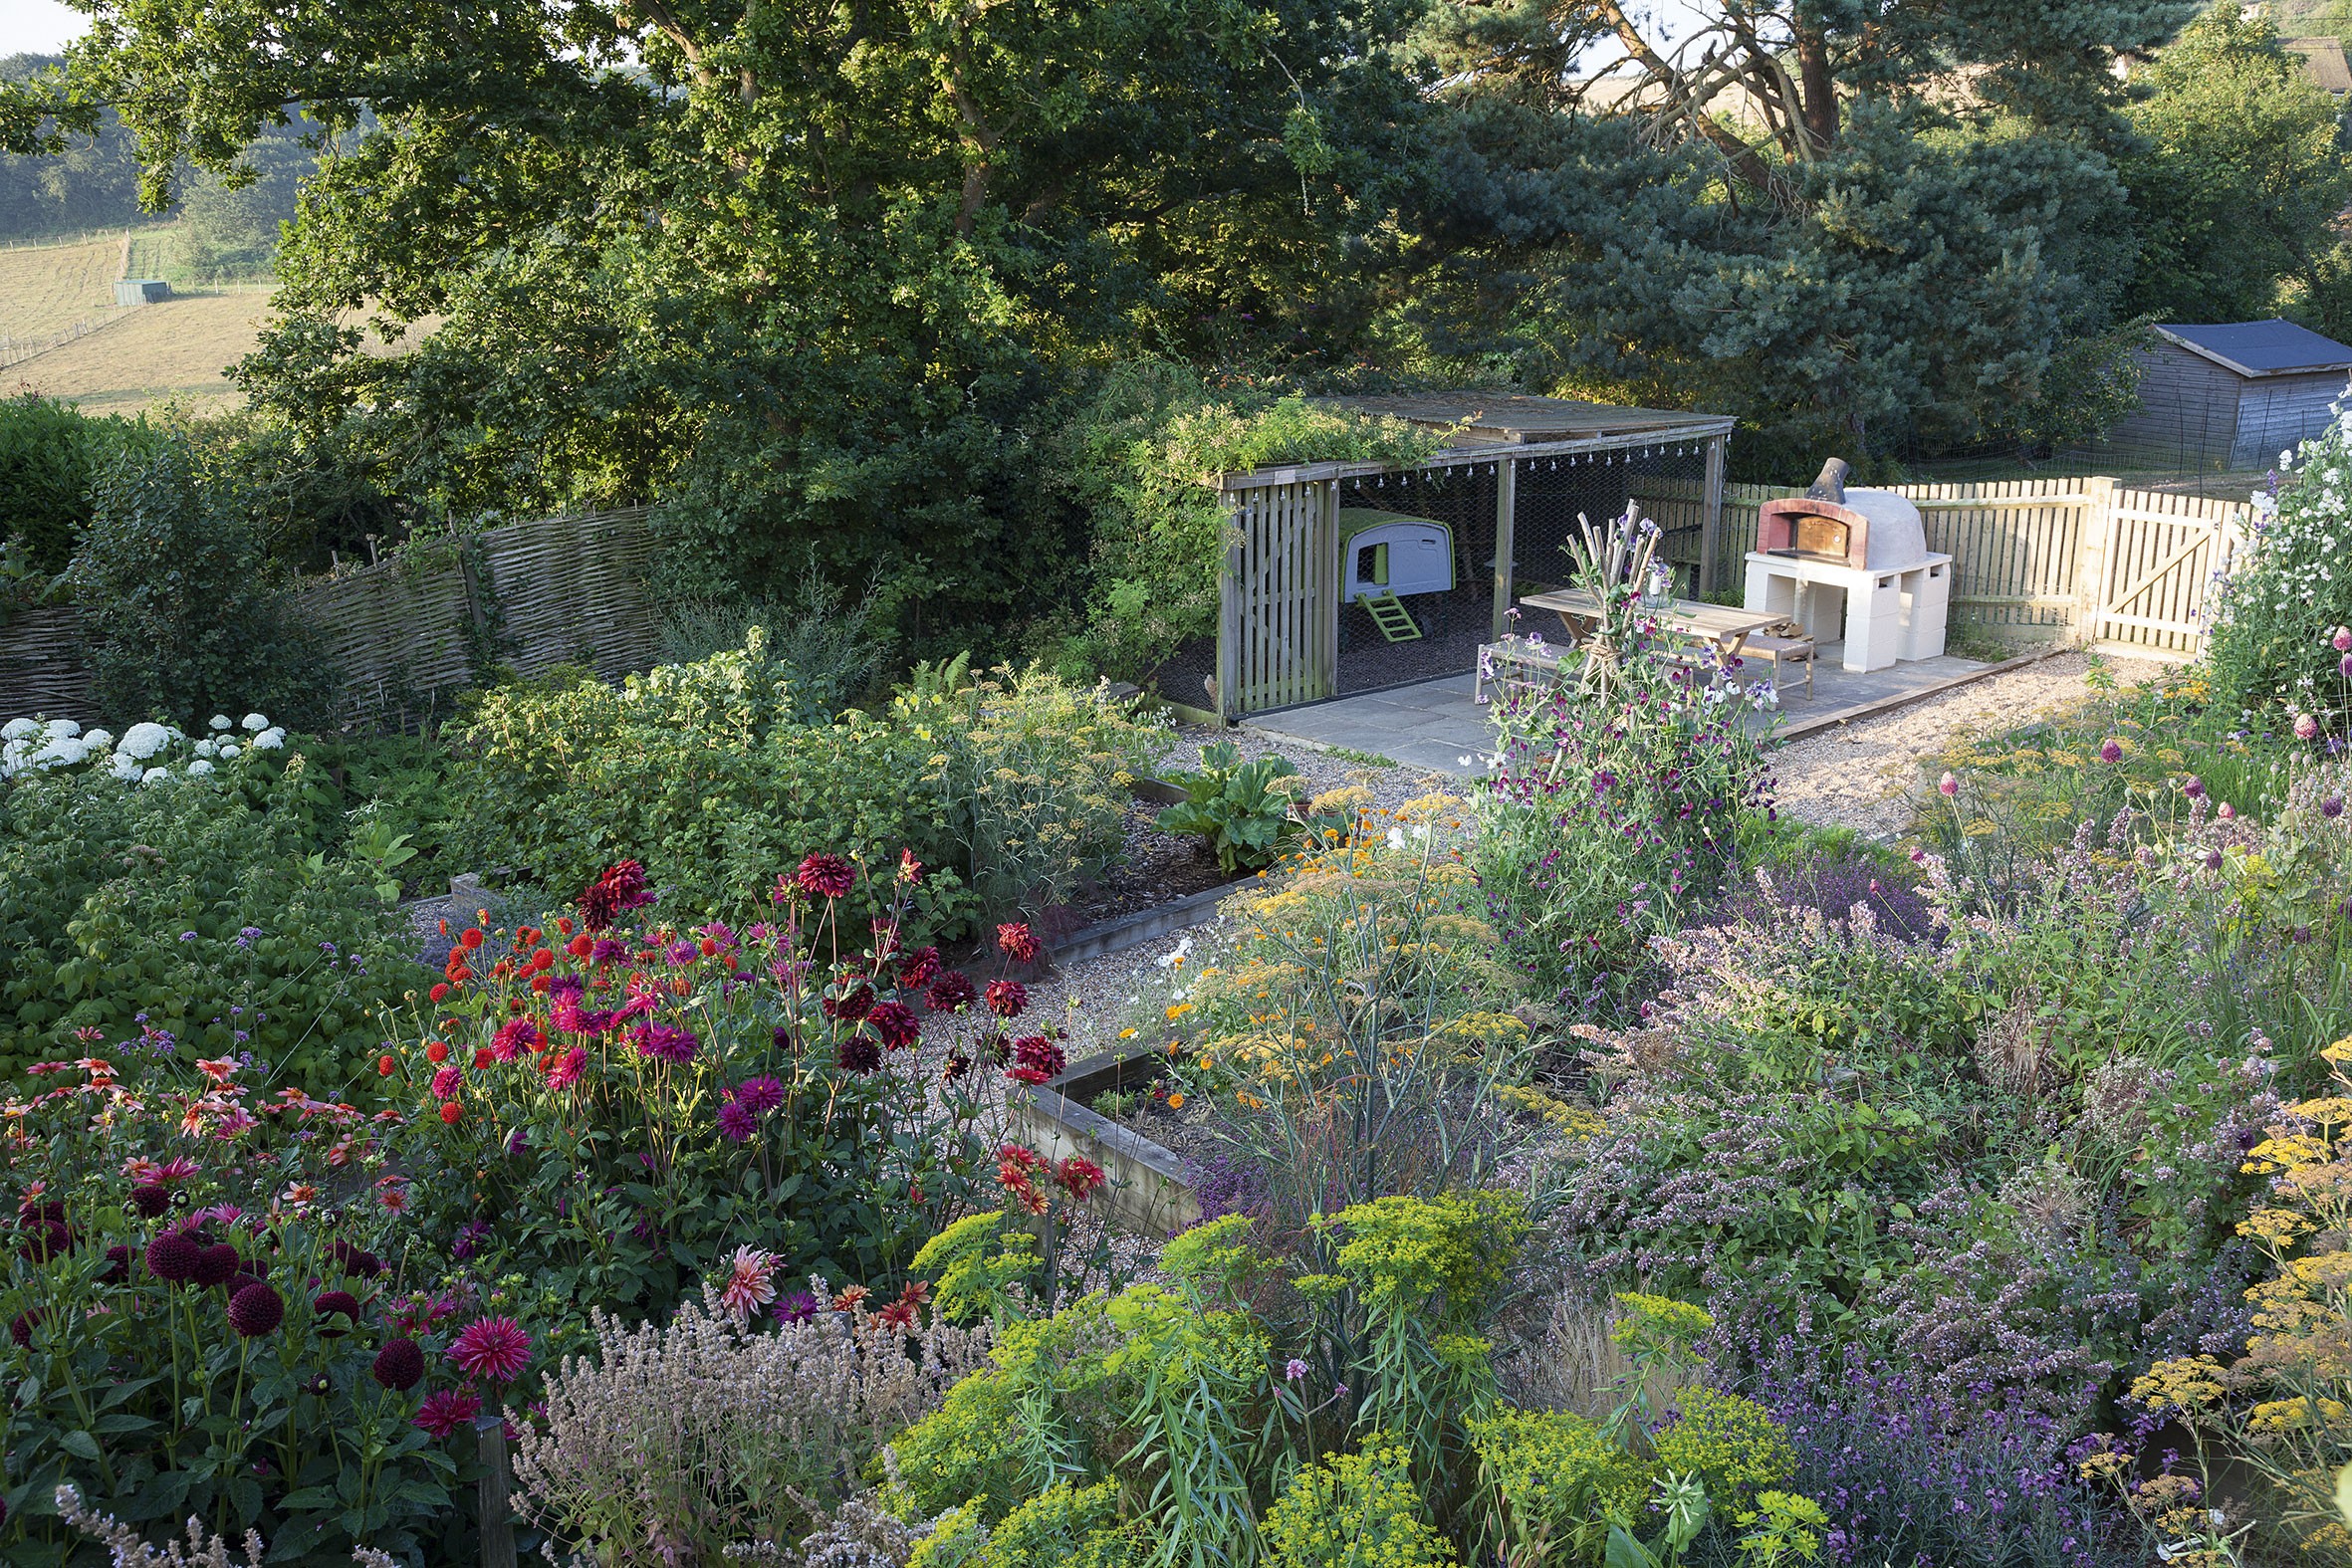 The view down the terraced garden to the vegetable beds, chicken run and barbecue terrace. Richly hued flowers in the dahlia patch contrast with the acid-green of Euphorbia ceratocarpa in the foreground